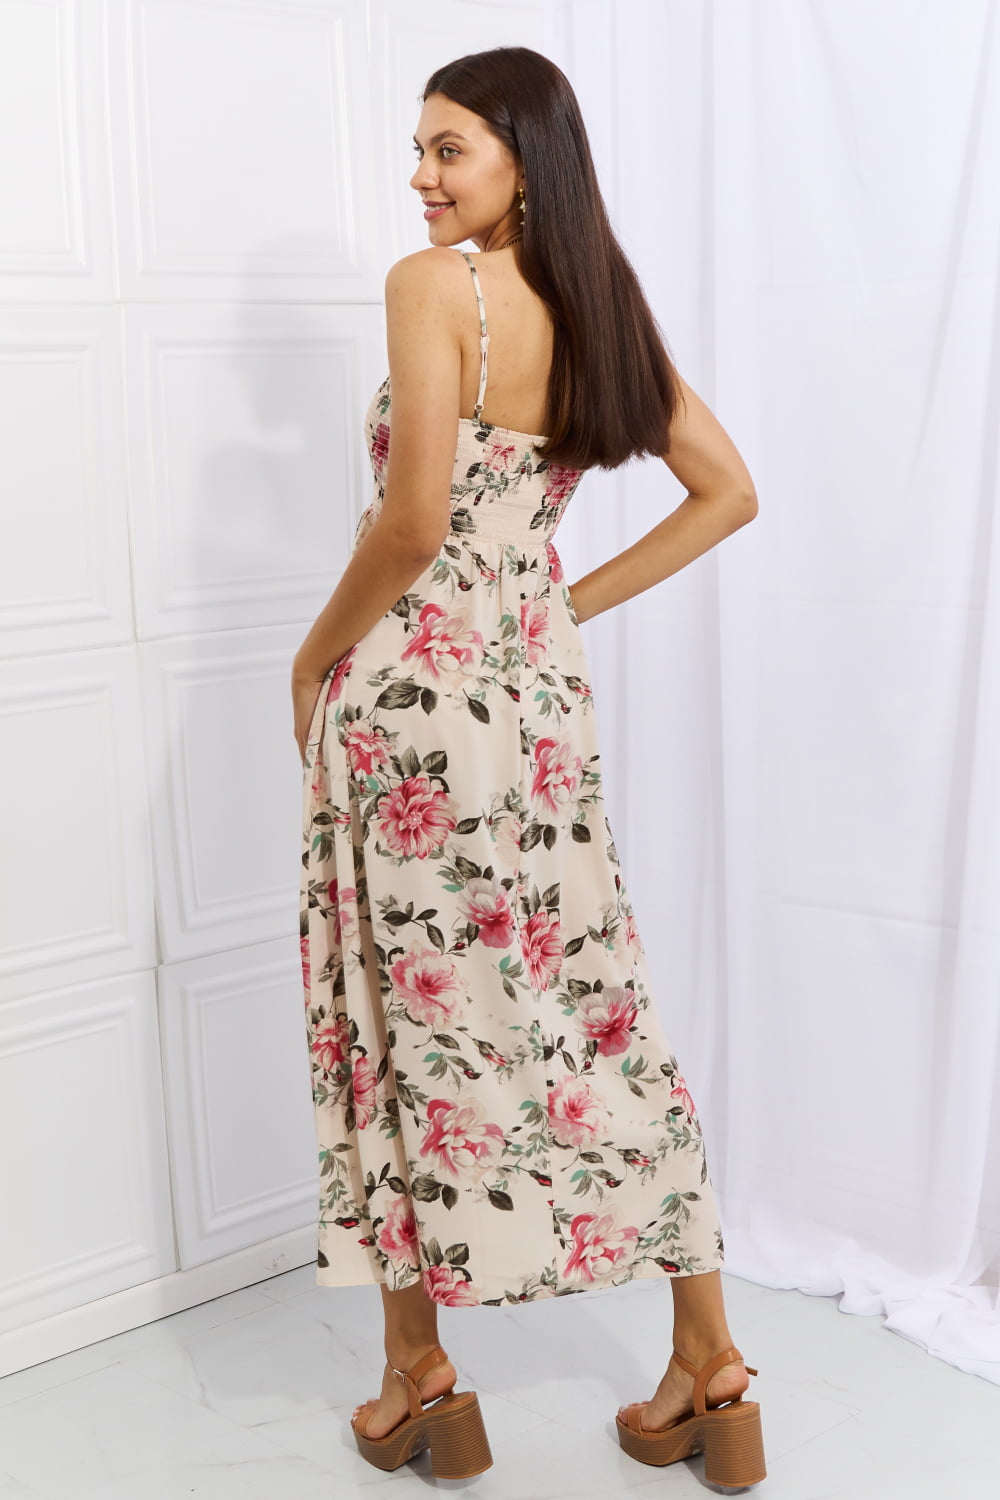 Charming Floral Maxi Dress in Pink for Beach Wedding Guests